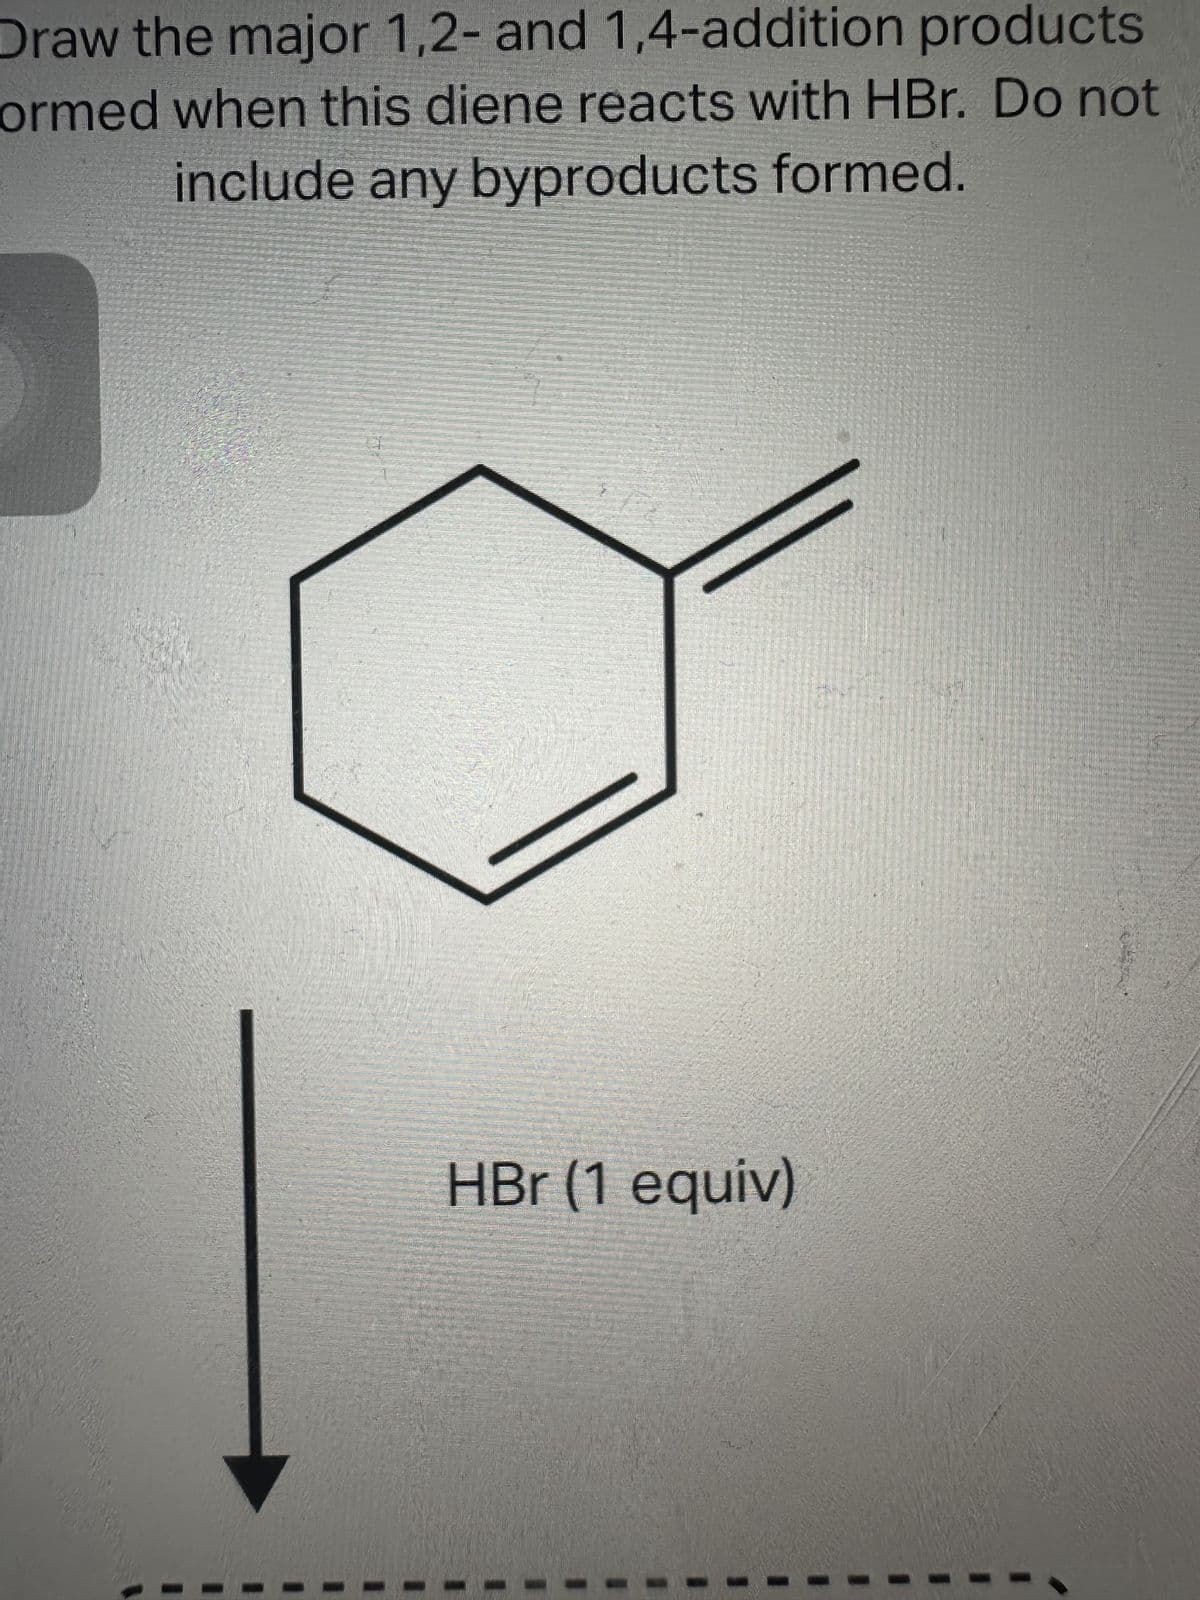 Draw the major 1,2- and 1,4-addition products
ormed when this diene reacts with HBr. Do not
include any byproducts formed.
S
1
1
HBr (1 equiv)